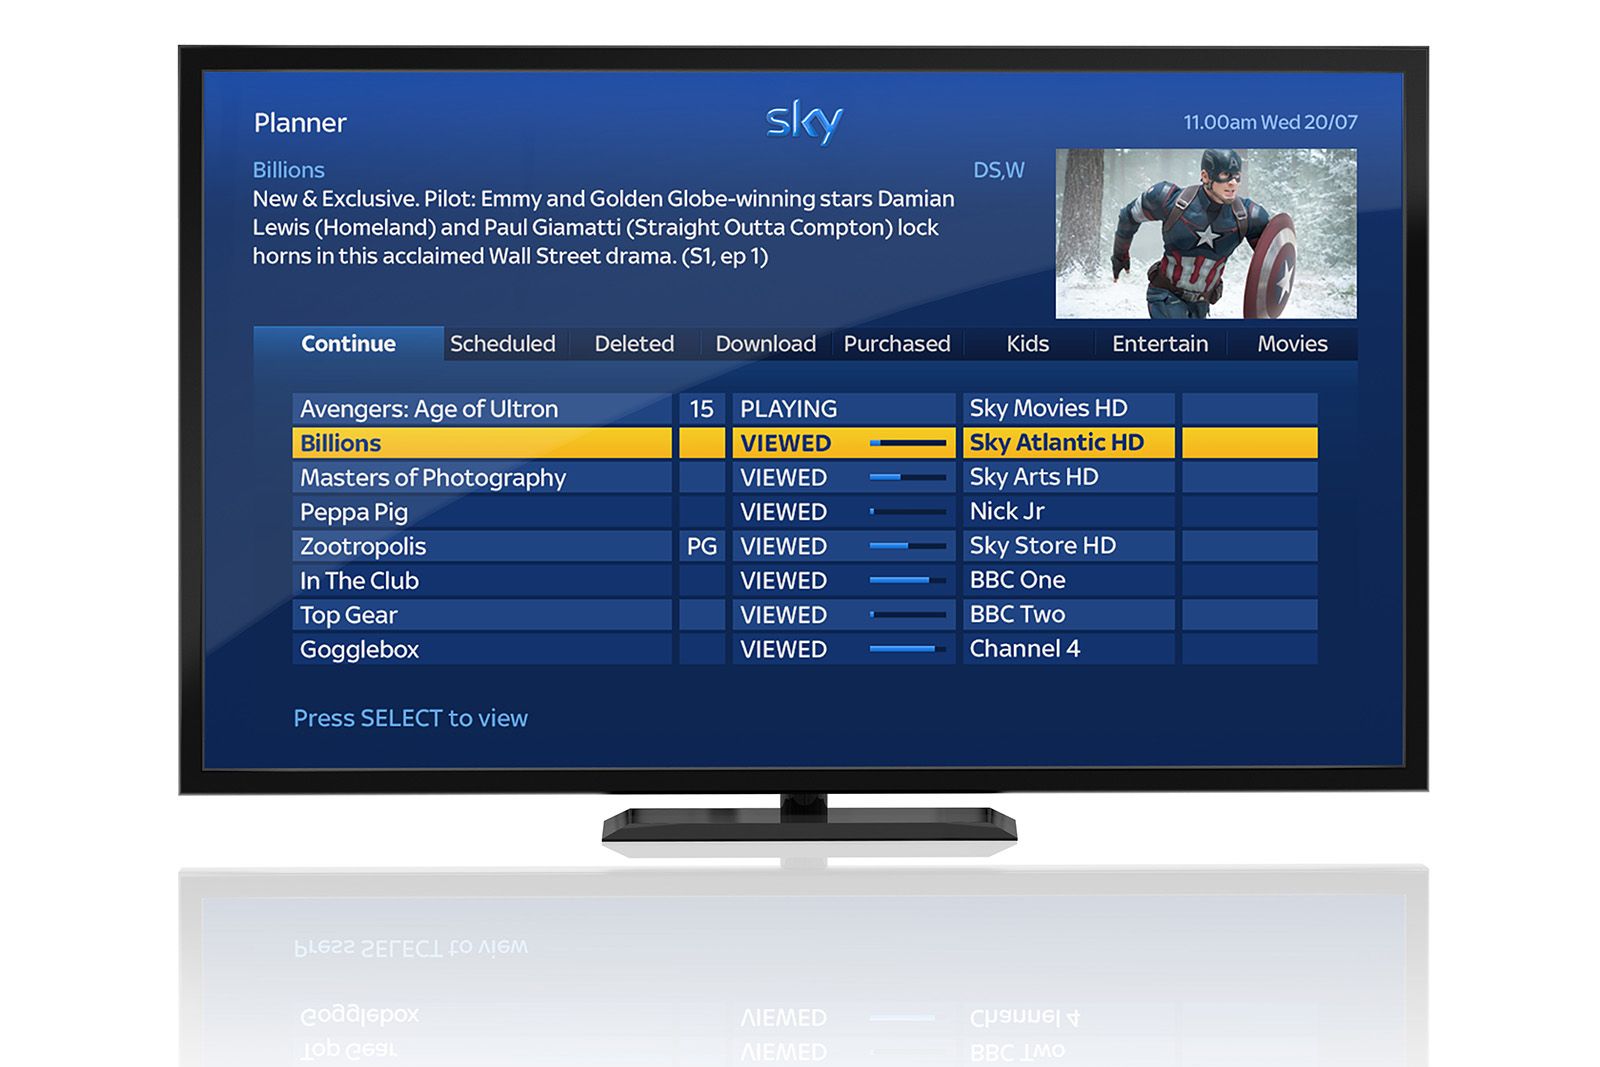 sky q features coming to sky here s what to expect in homepage refresh image 2